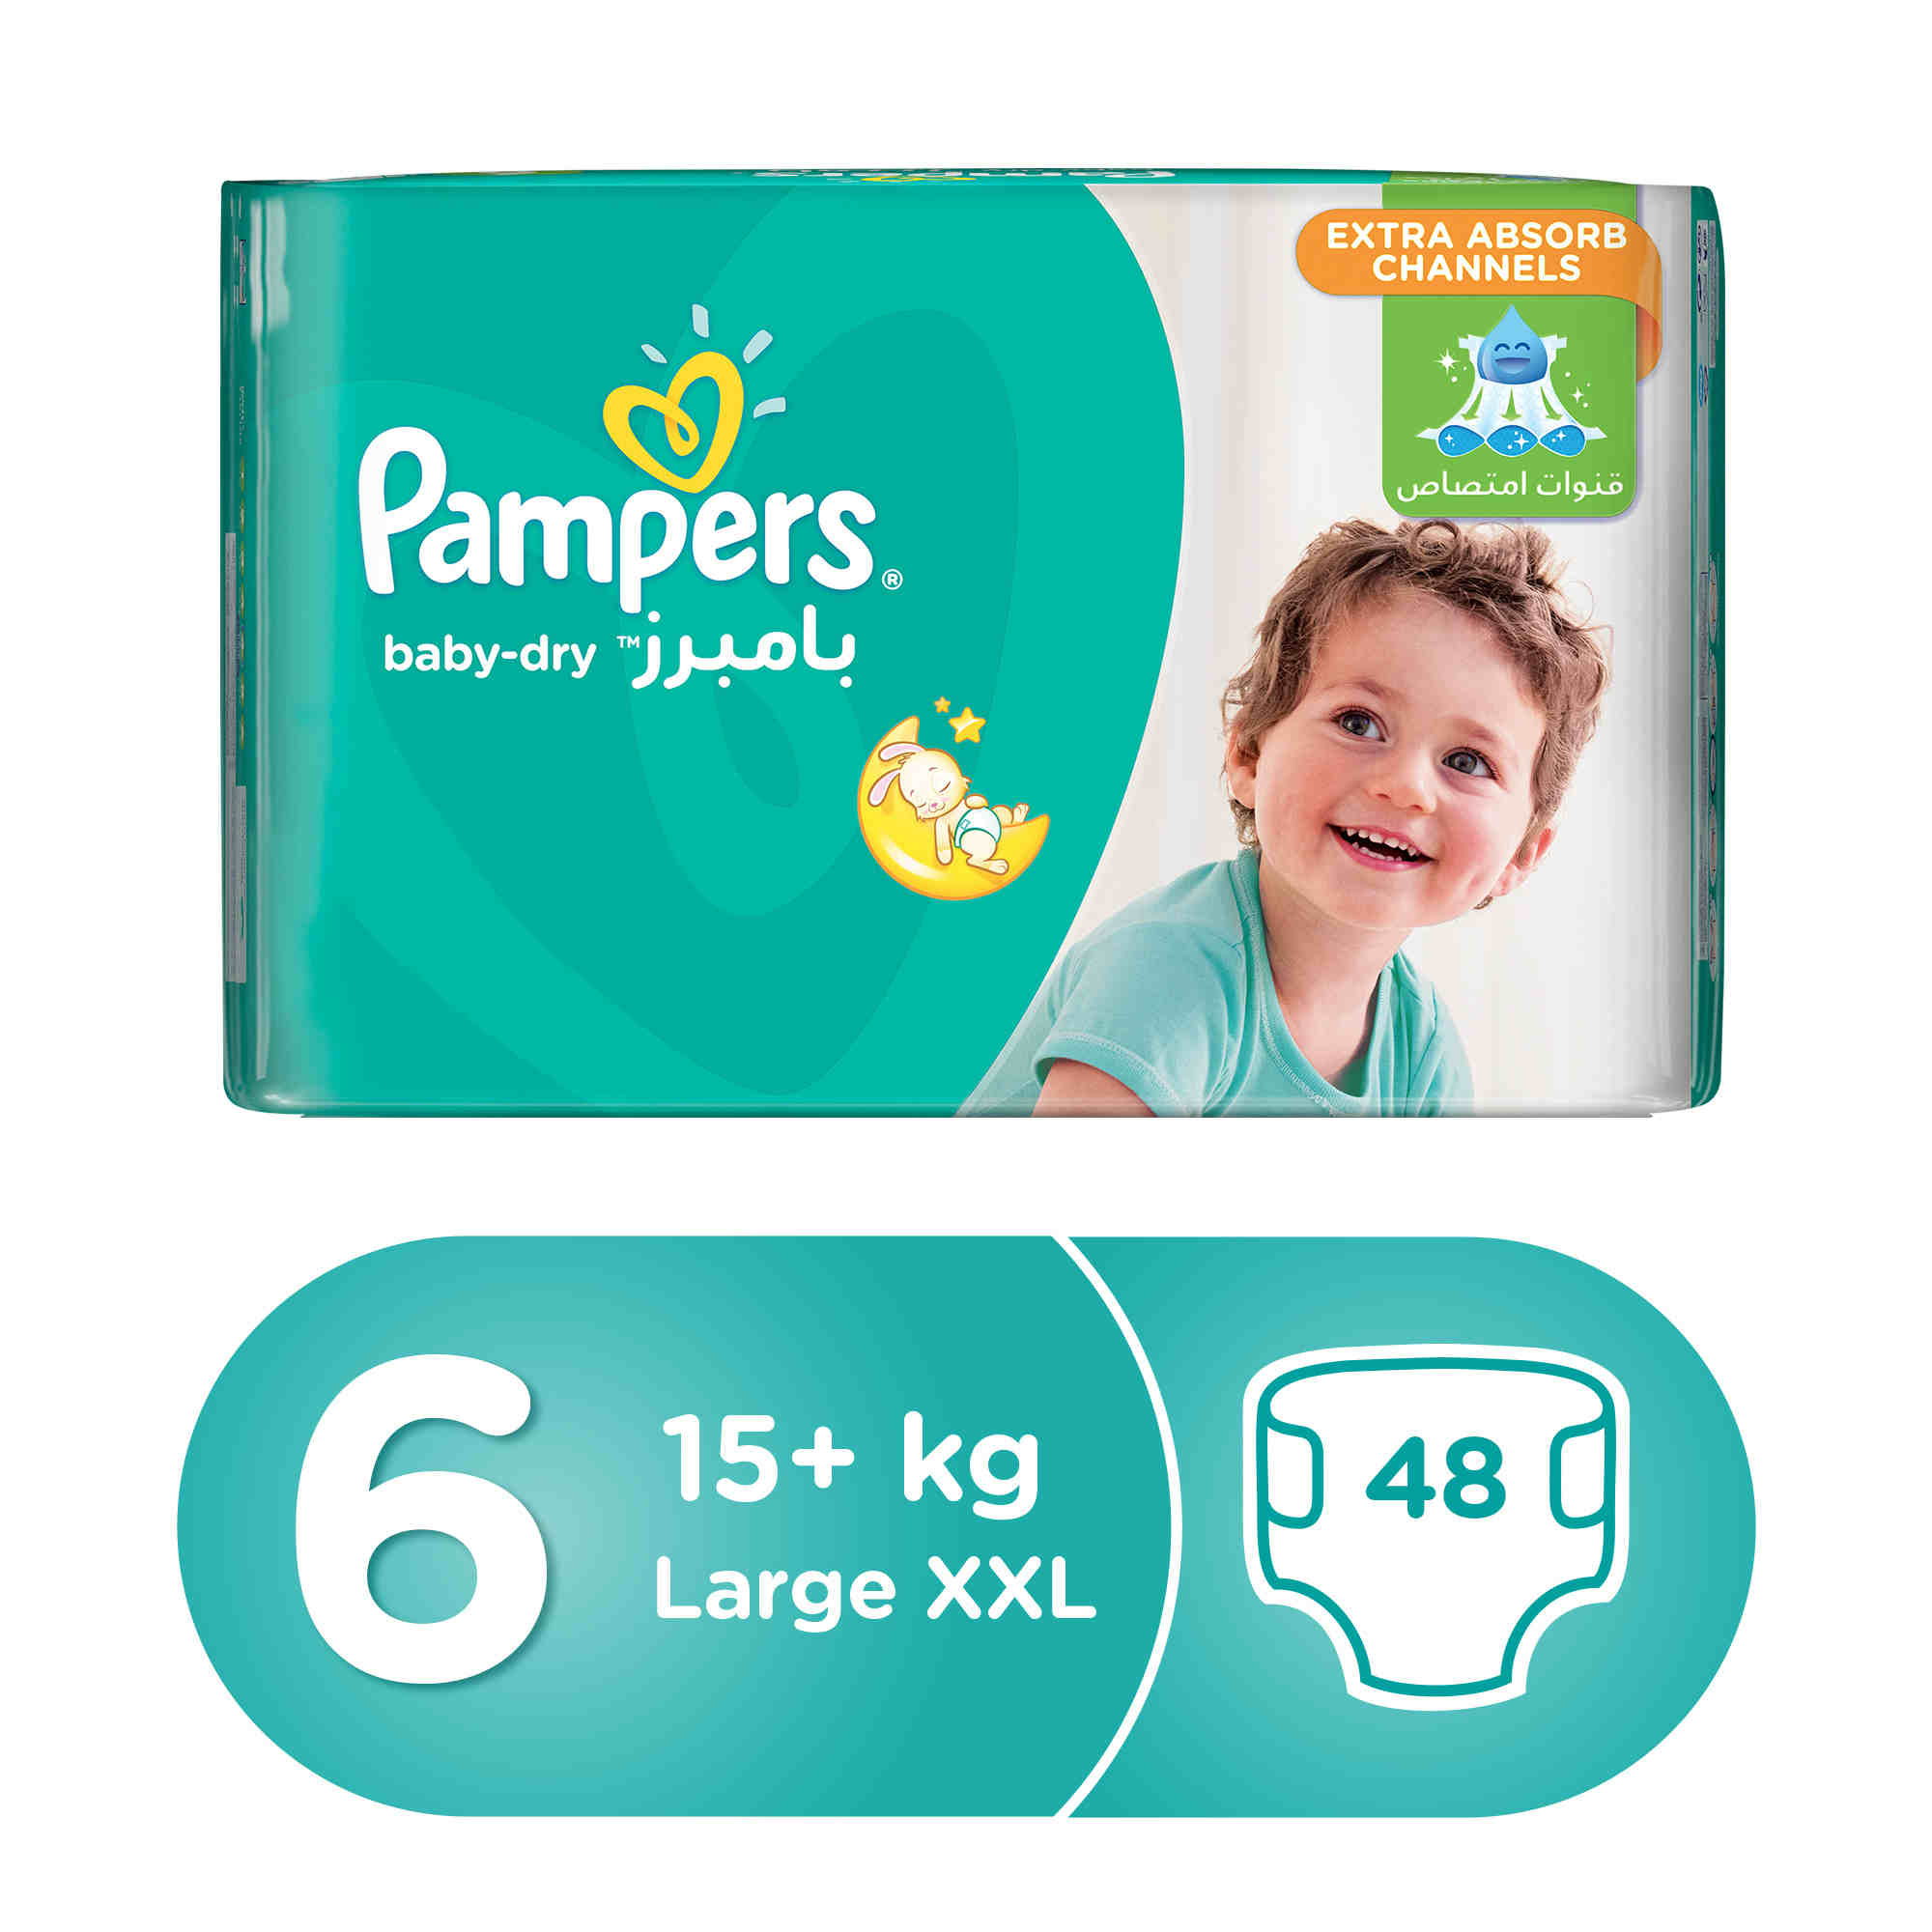 active baby dry pampers 4 mega box